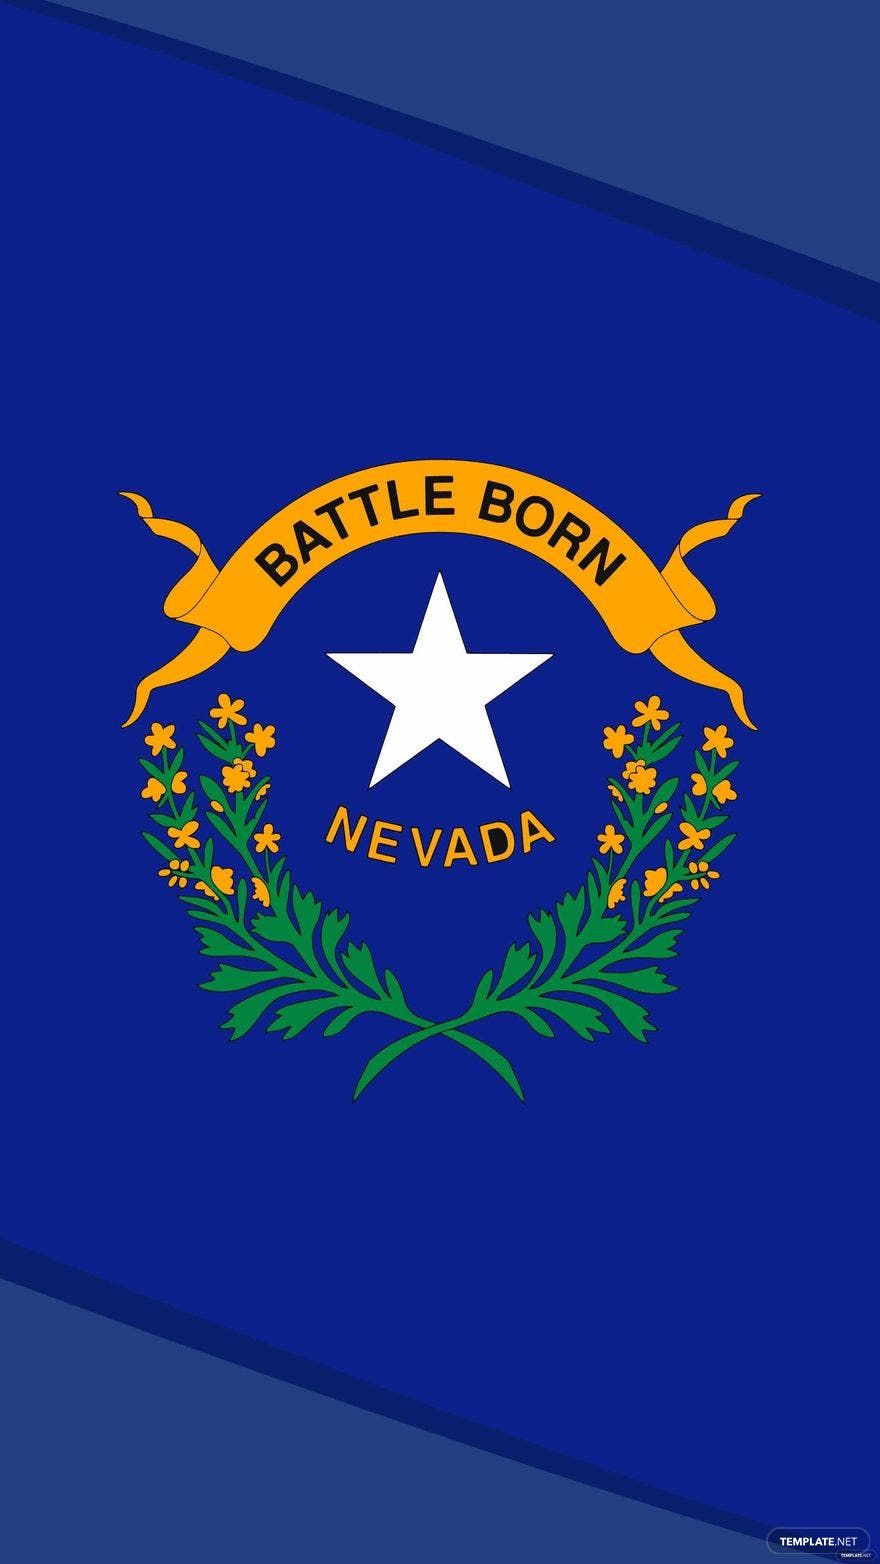 Nevada Day iPhone Background in PDF, Illustrator, PSD, EPS, SVG, JPG, PNG